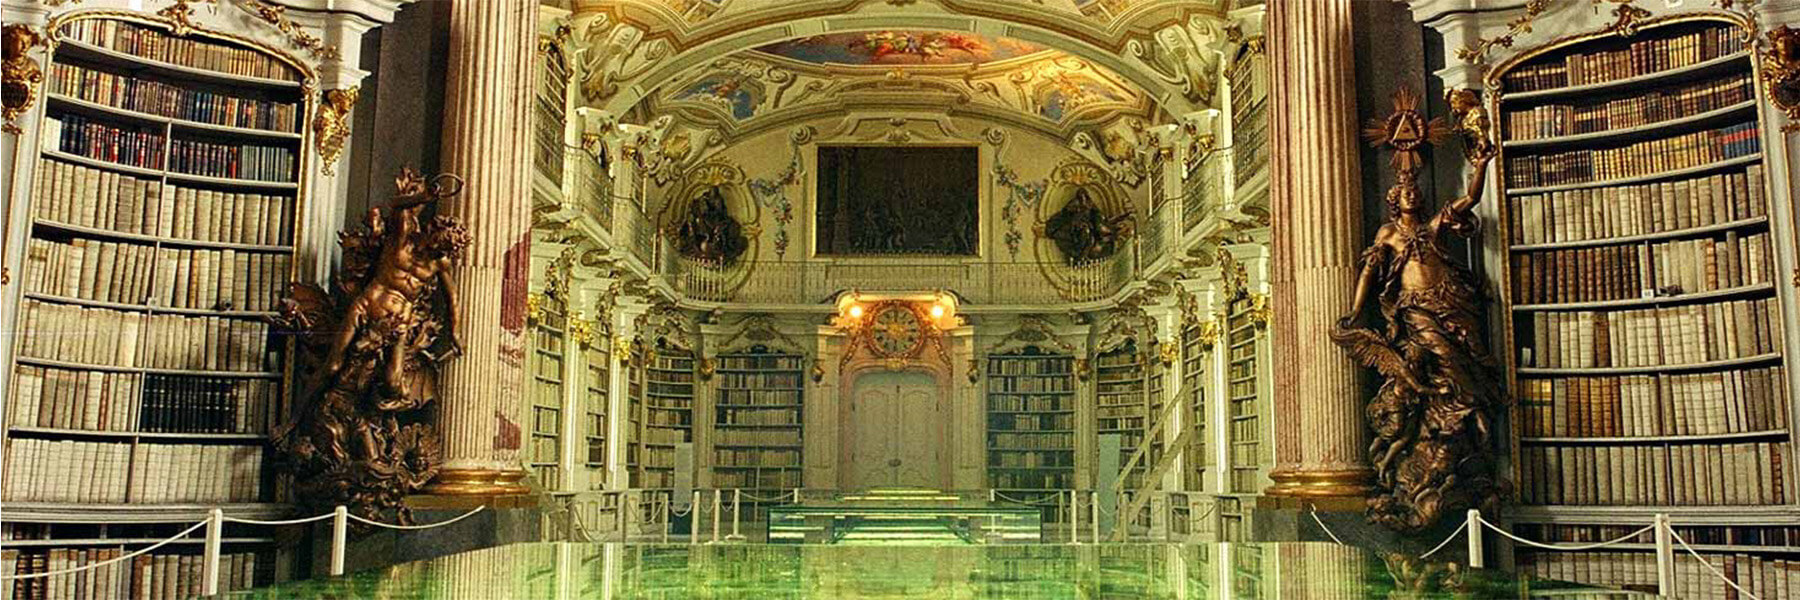 A library in Austria